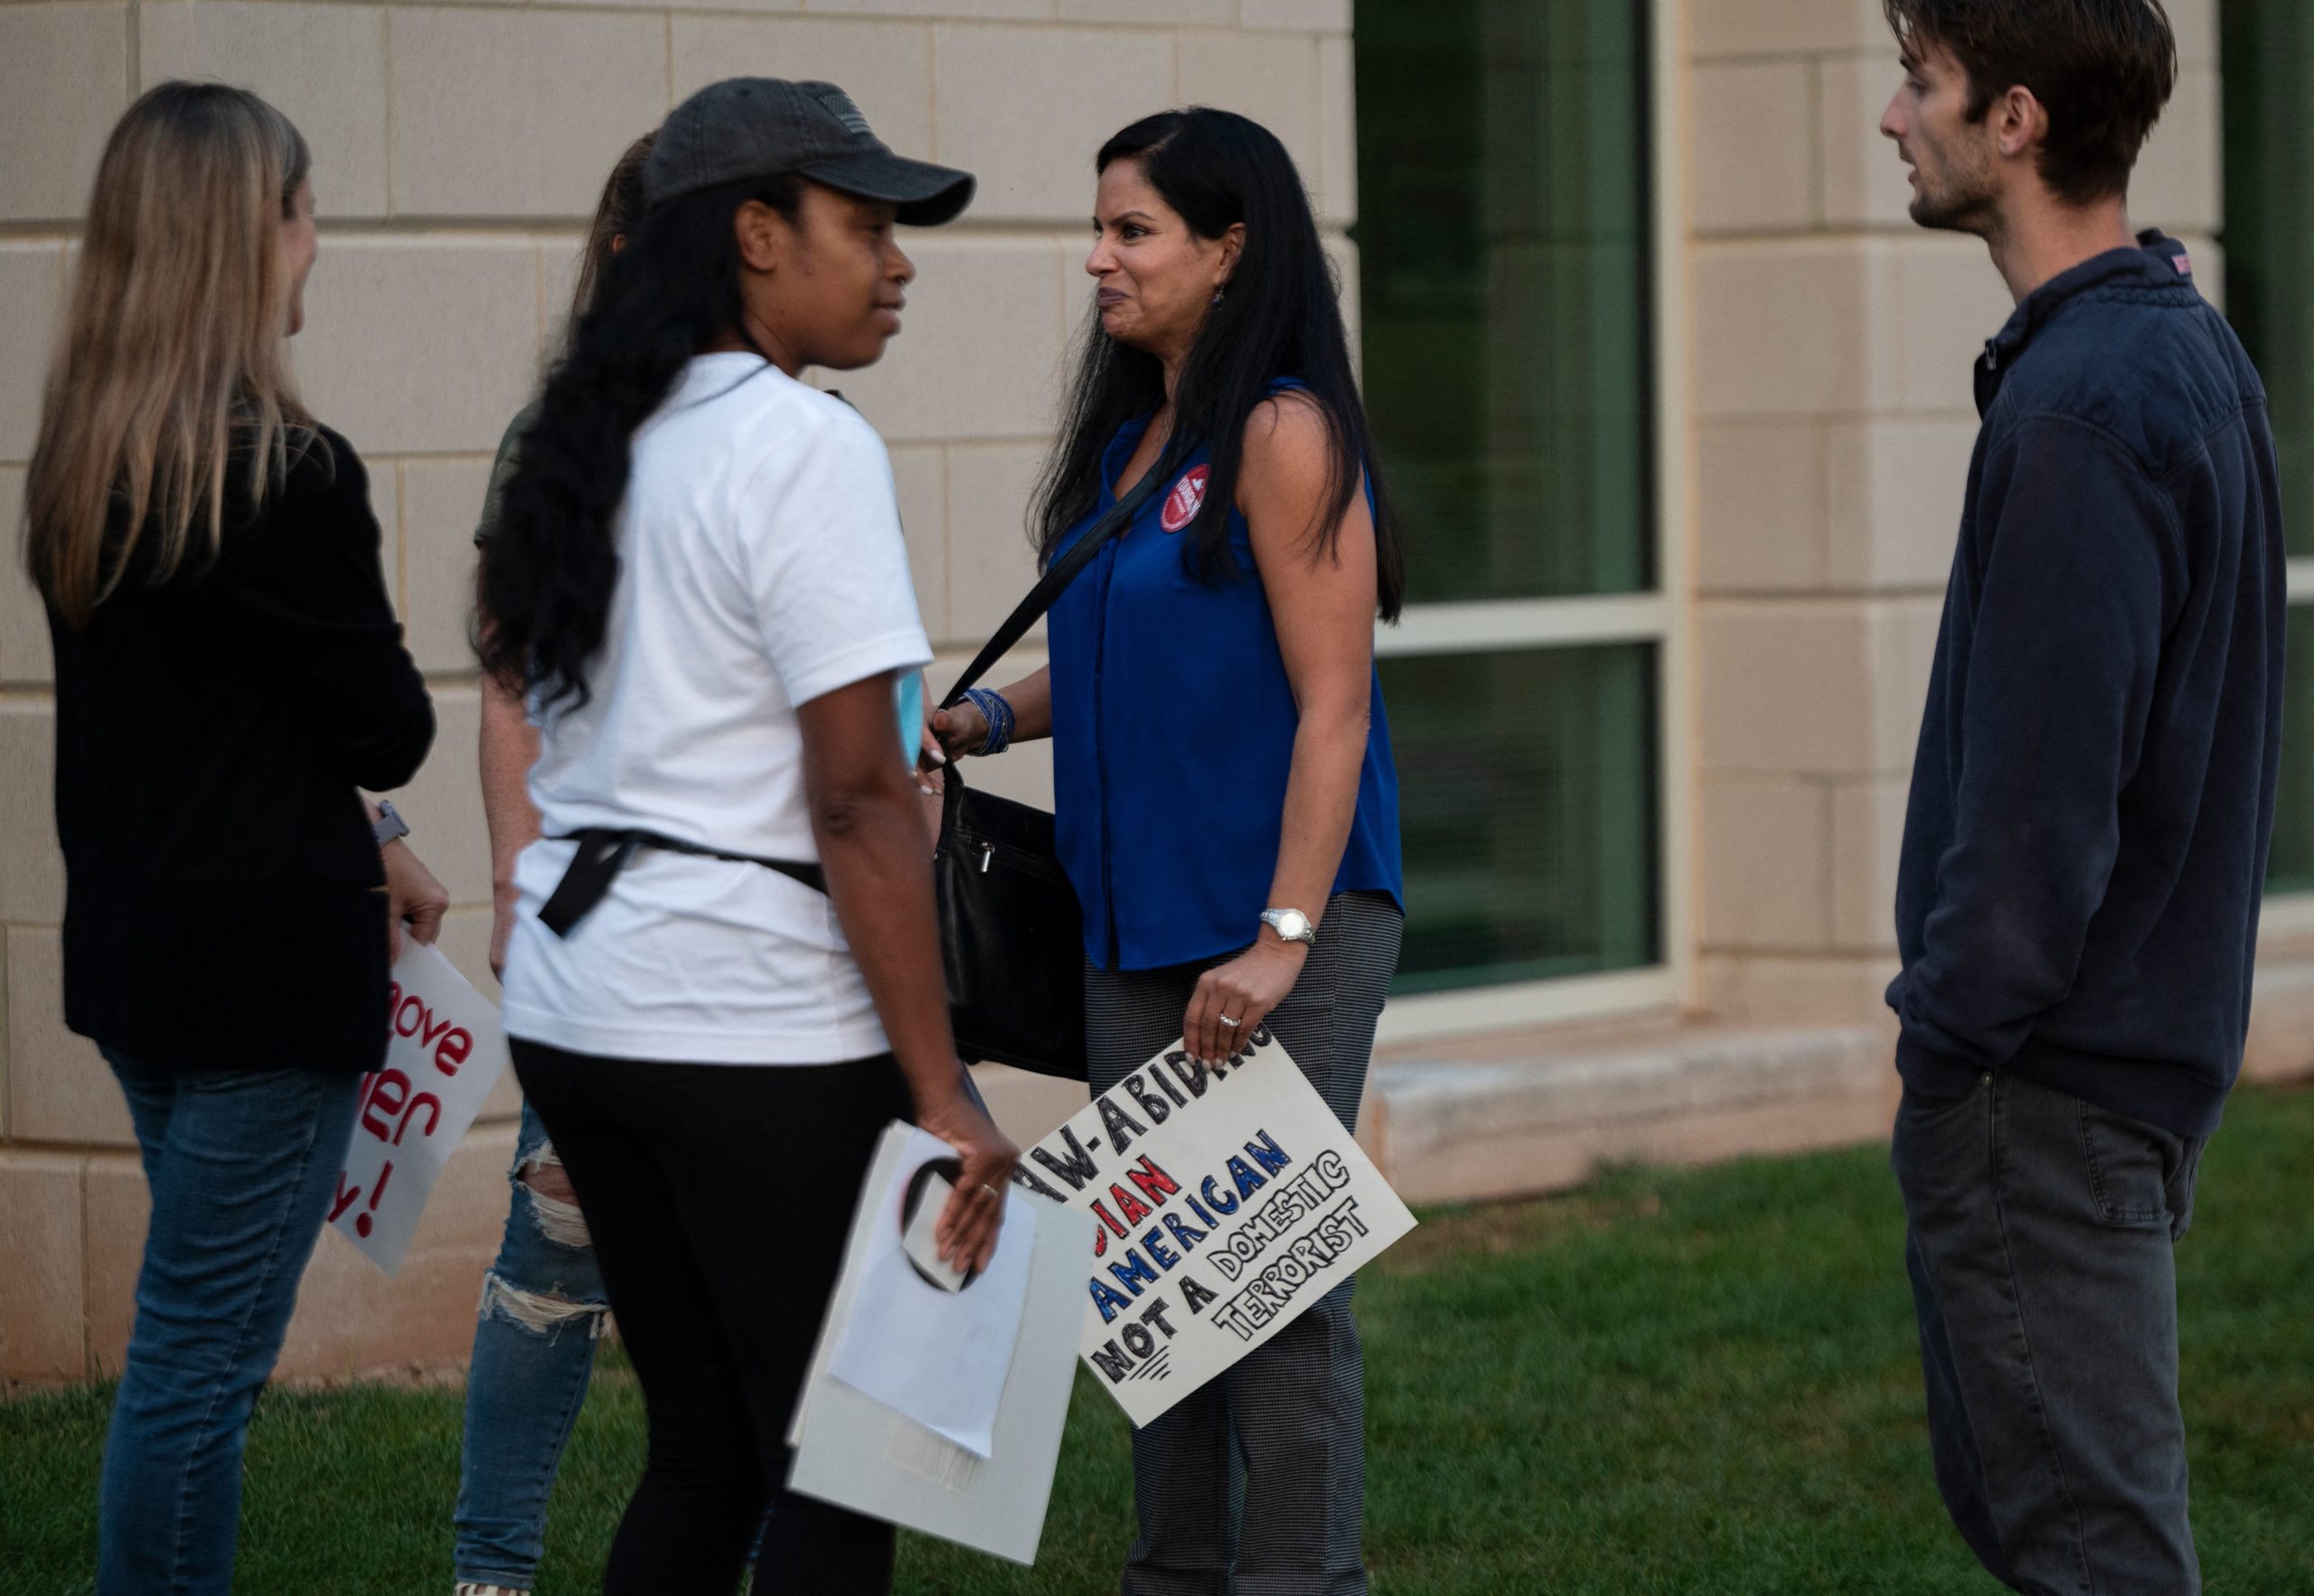 Protesters and activists stand outside a Loudoun County Public Schools (LCPS) board meeting in Ashburn, Virginia on October 12, 2021. (Photo by Andrew CABALLERO-REYNOLDS / AFP) (Photo by ANDREW CABALLERO-REYNOLDS/AFP via Getty Images)